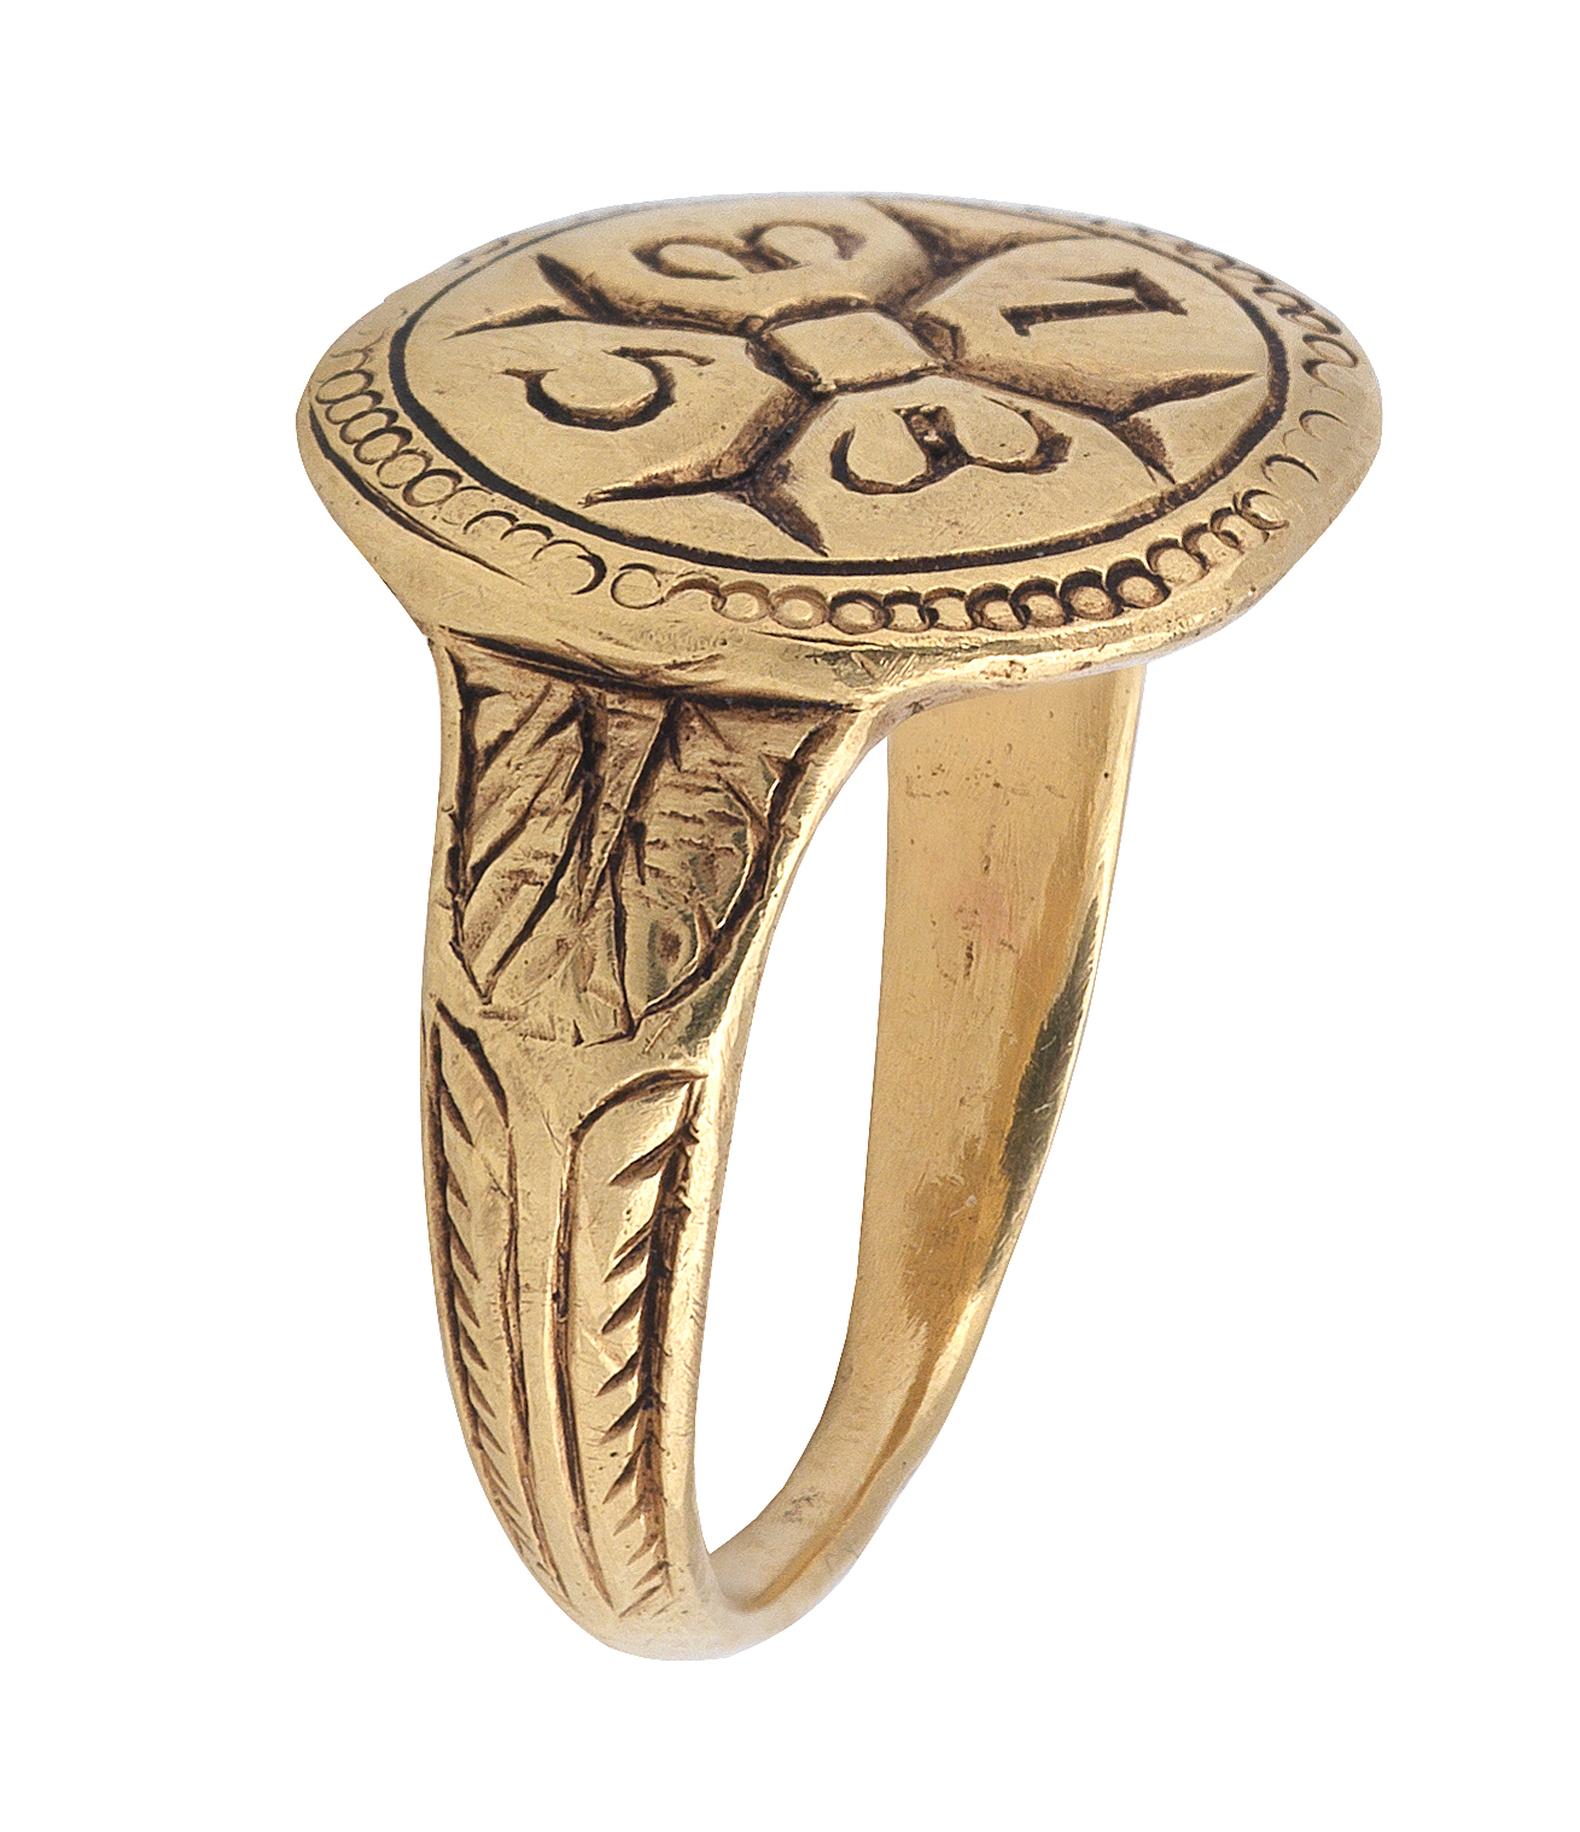 Gold Merchants Ring with marking used to stamp goods and as signature
Size 9
Weight 11,5gr.